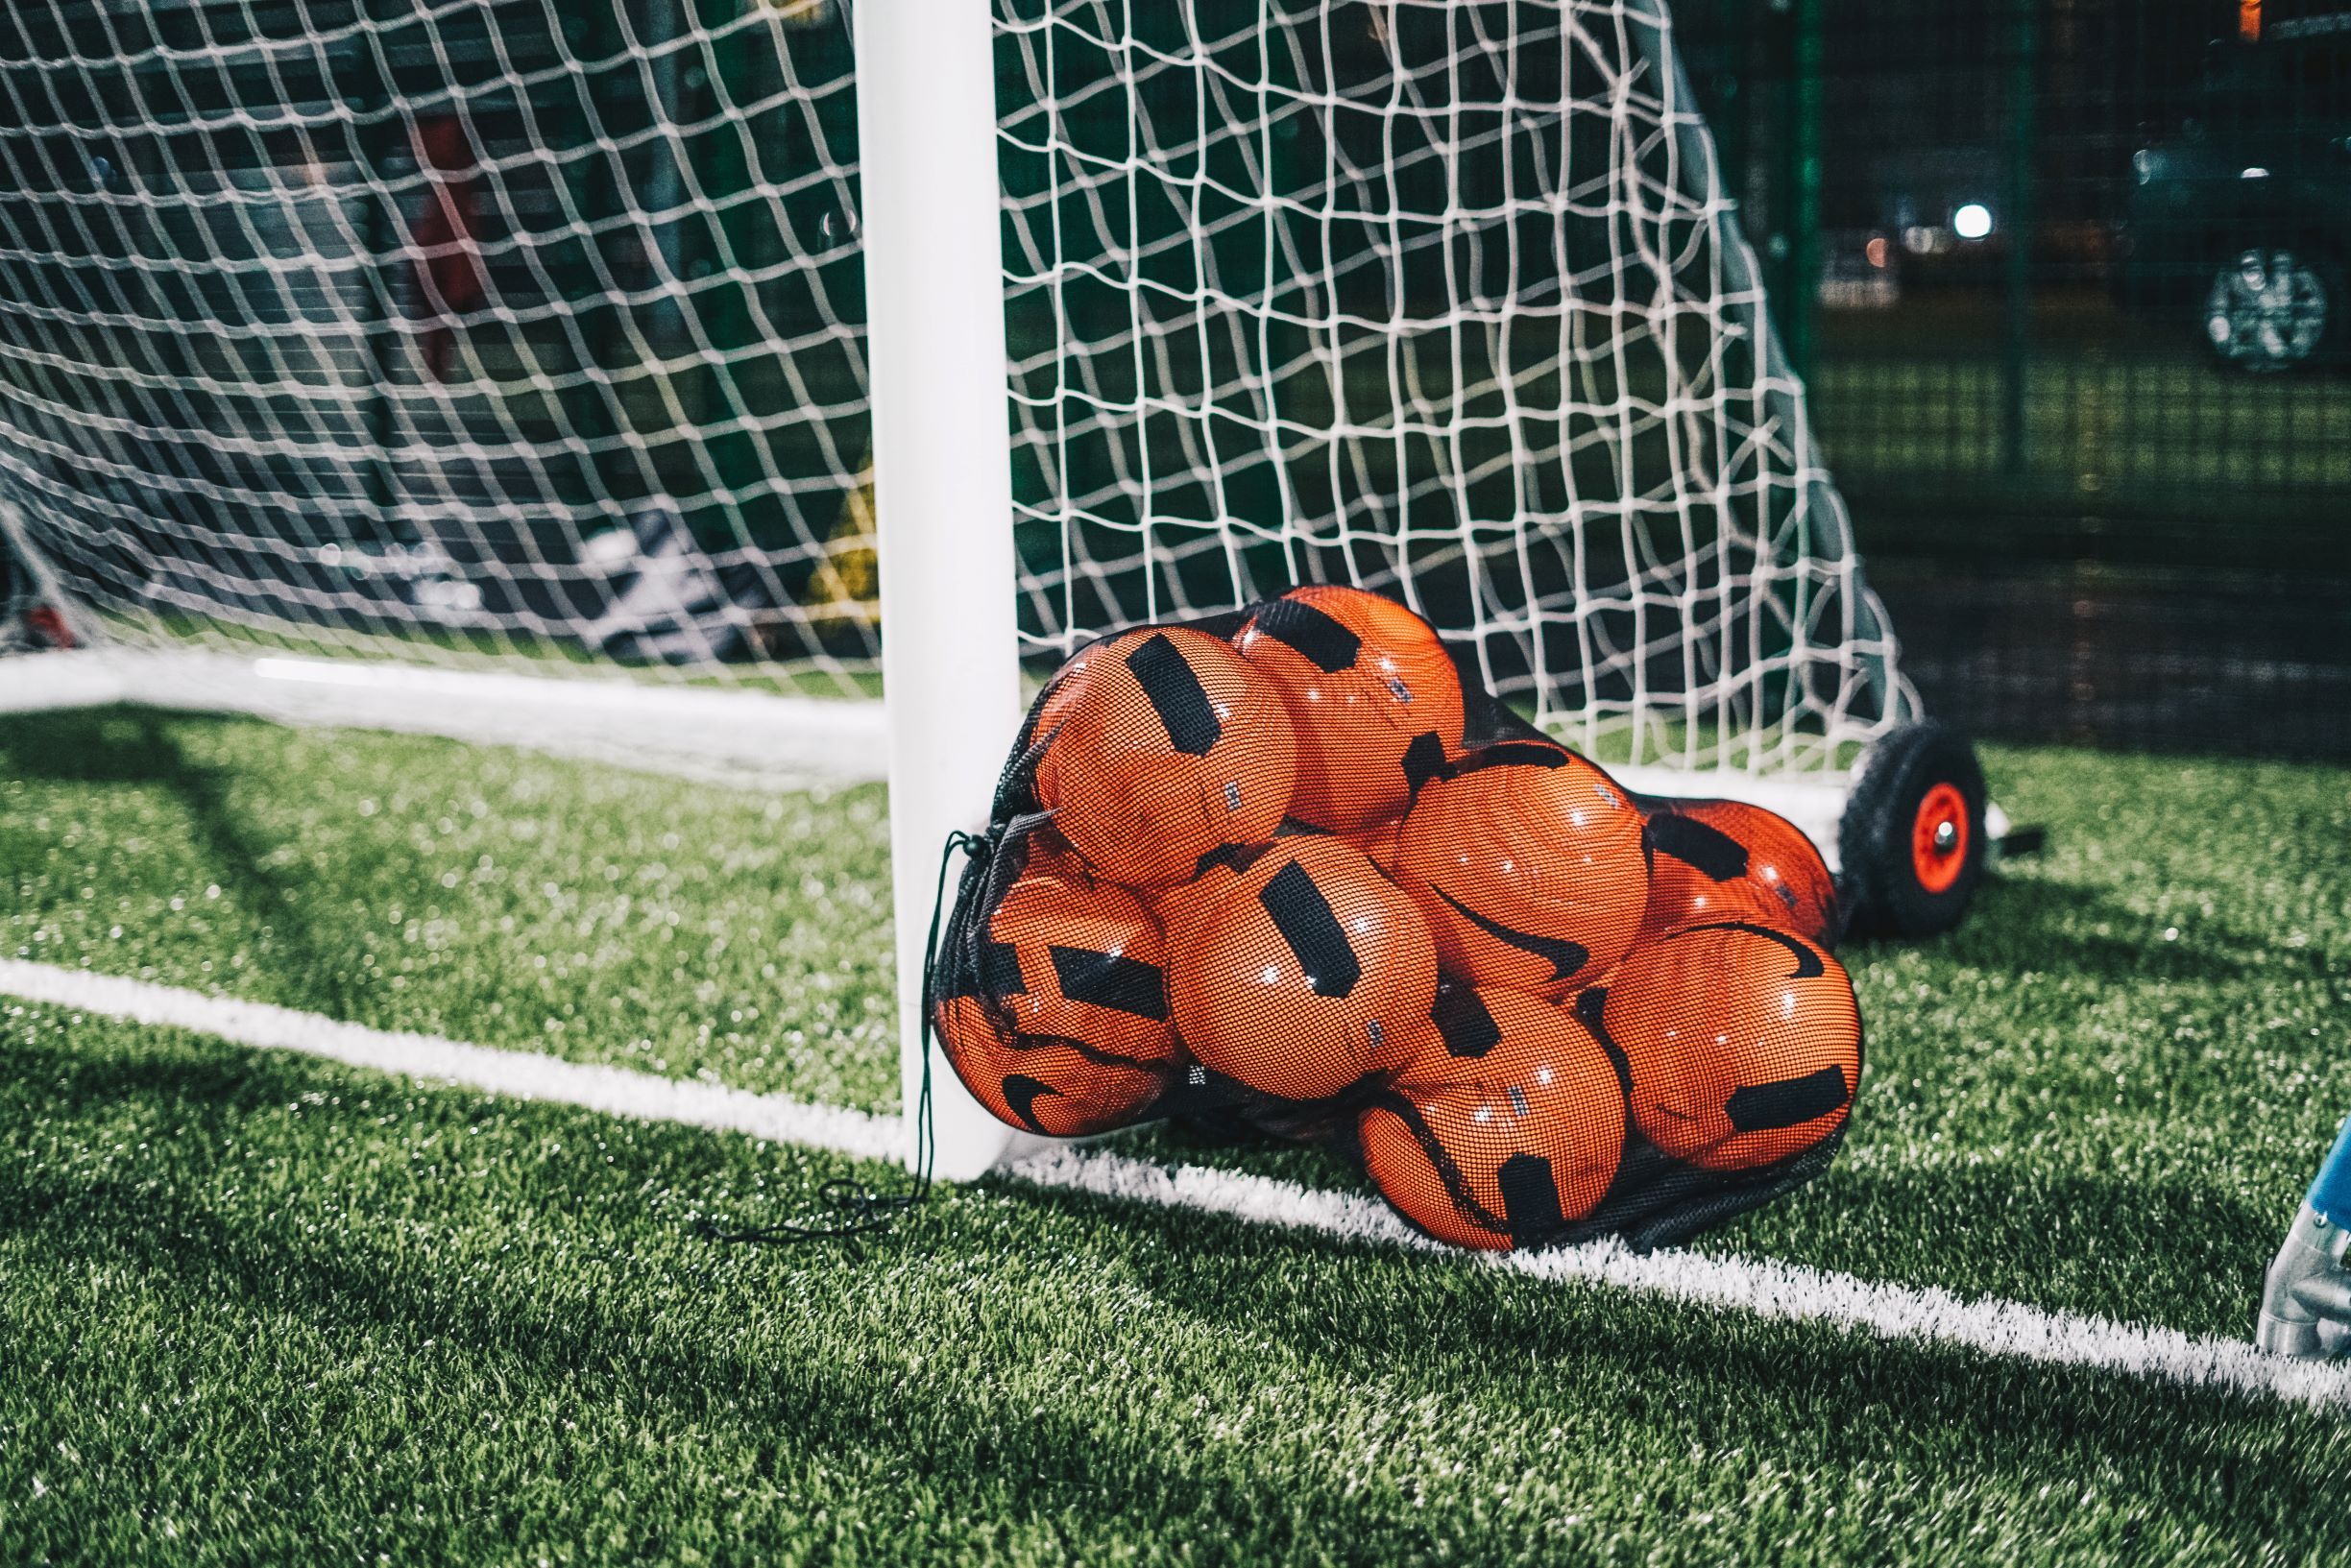 Footballs in a bag sitting next to a goal ready for a training session